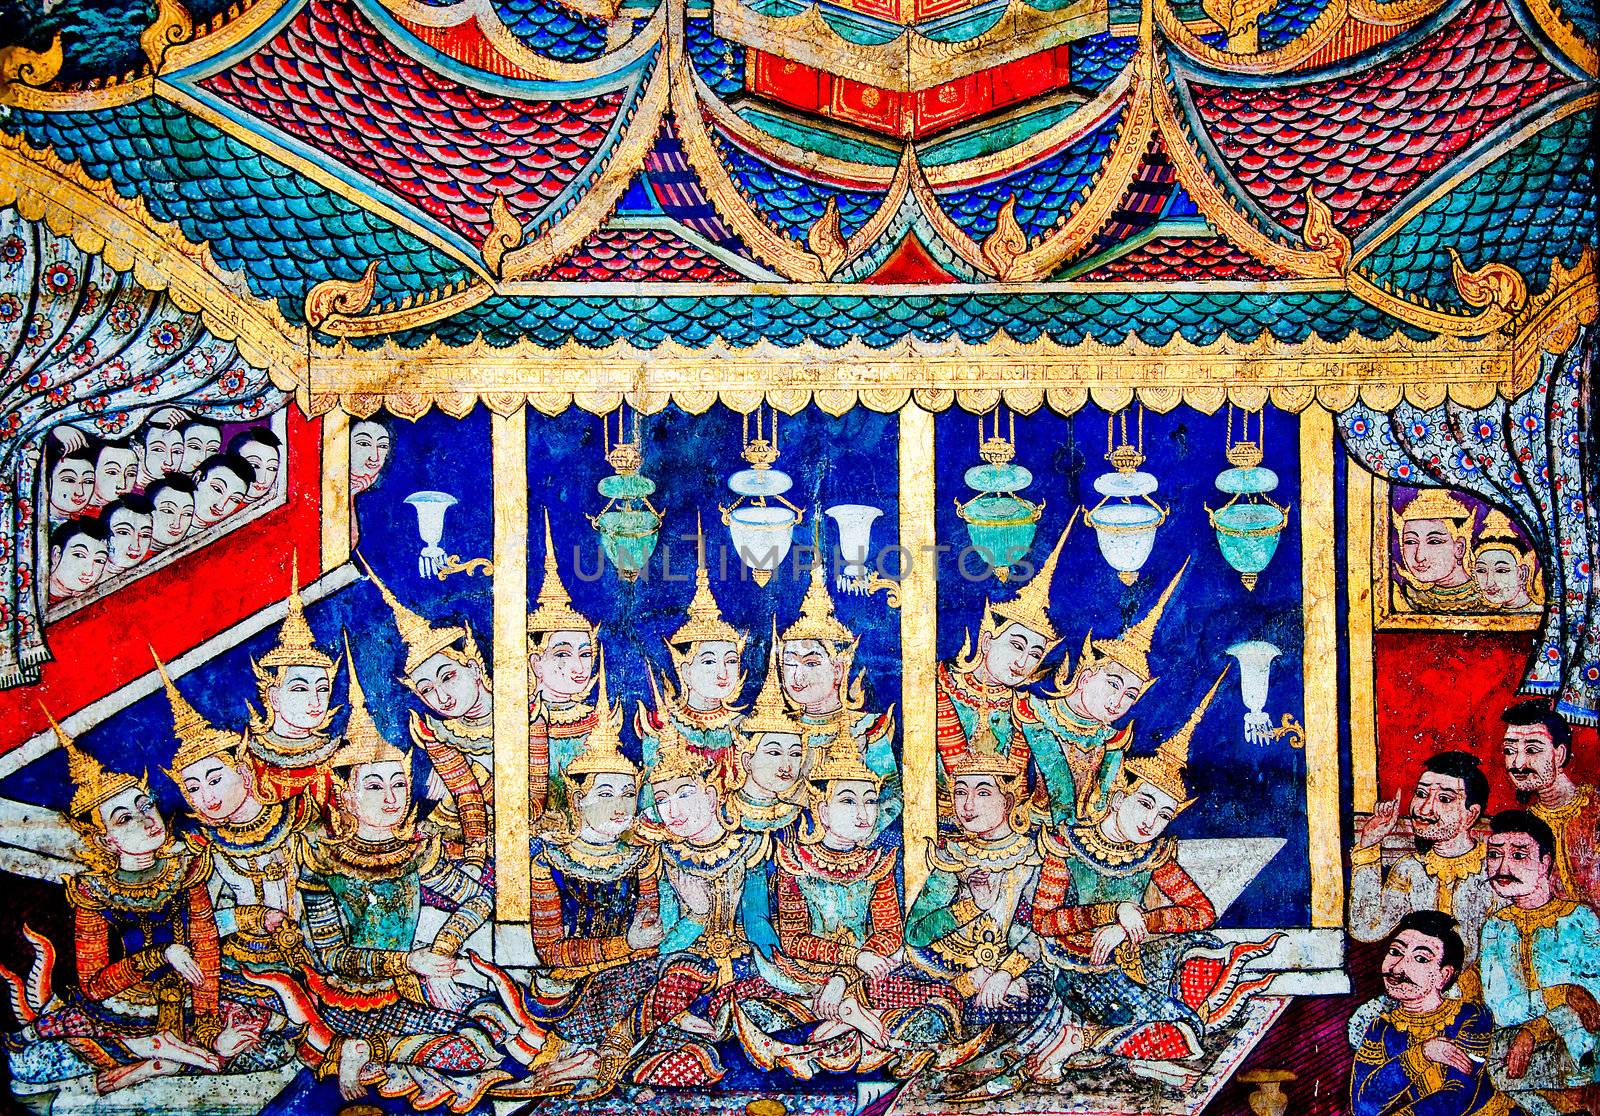 CHIANGMAI ,THAILAND - JANUARY 25 : Ancient  painting on monastery wall in Buddhist temple on january 25, 2012 in chiangmai, Thailand. Ancient painting showing the cultural life of Thai people in ancient times